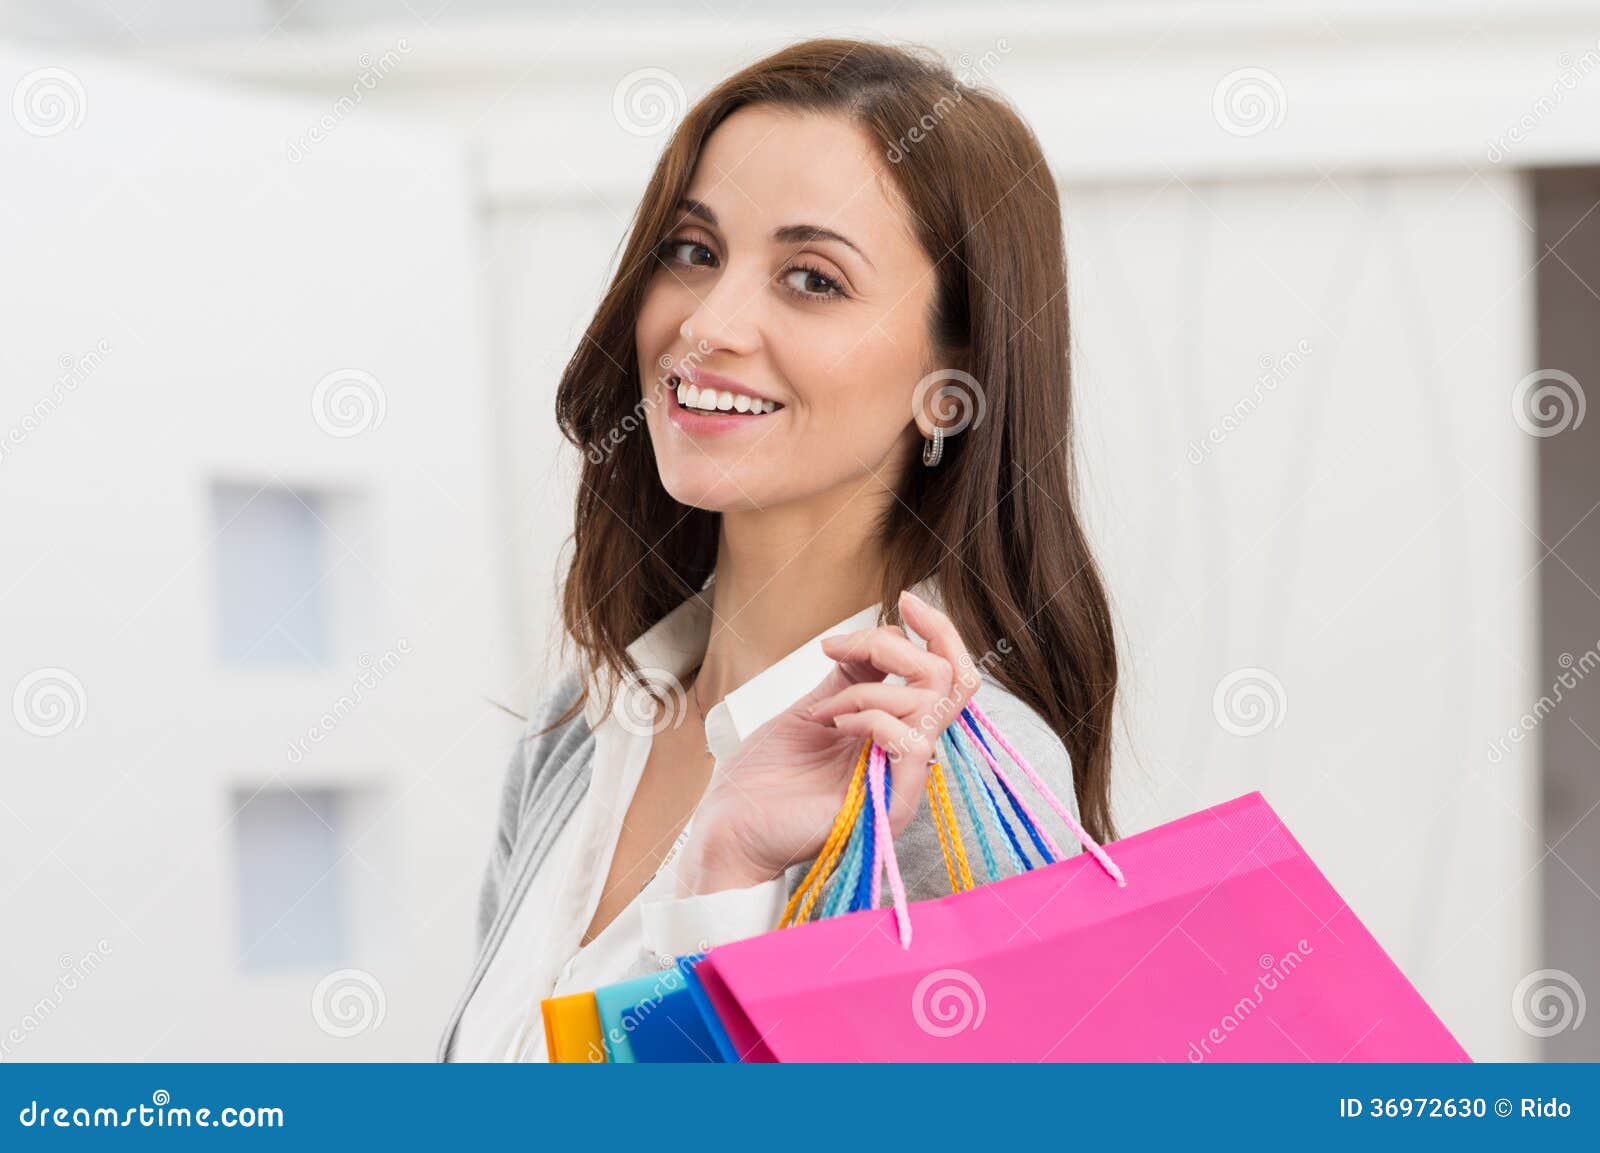 Woman Holding Shopping Bags Stock Photo - Image of lady, gift: 36972630